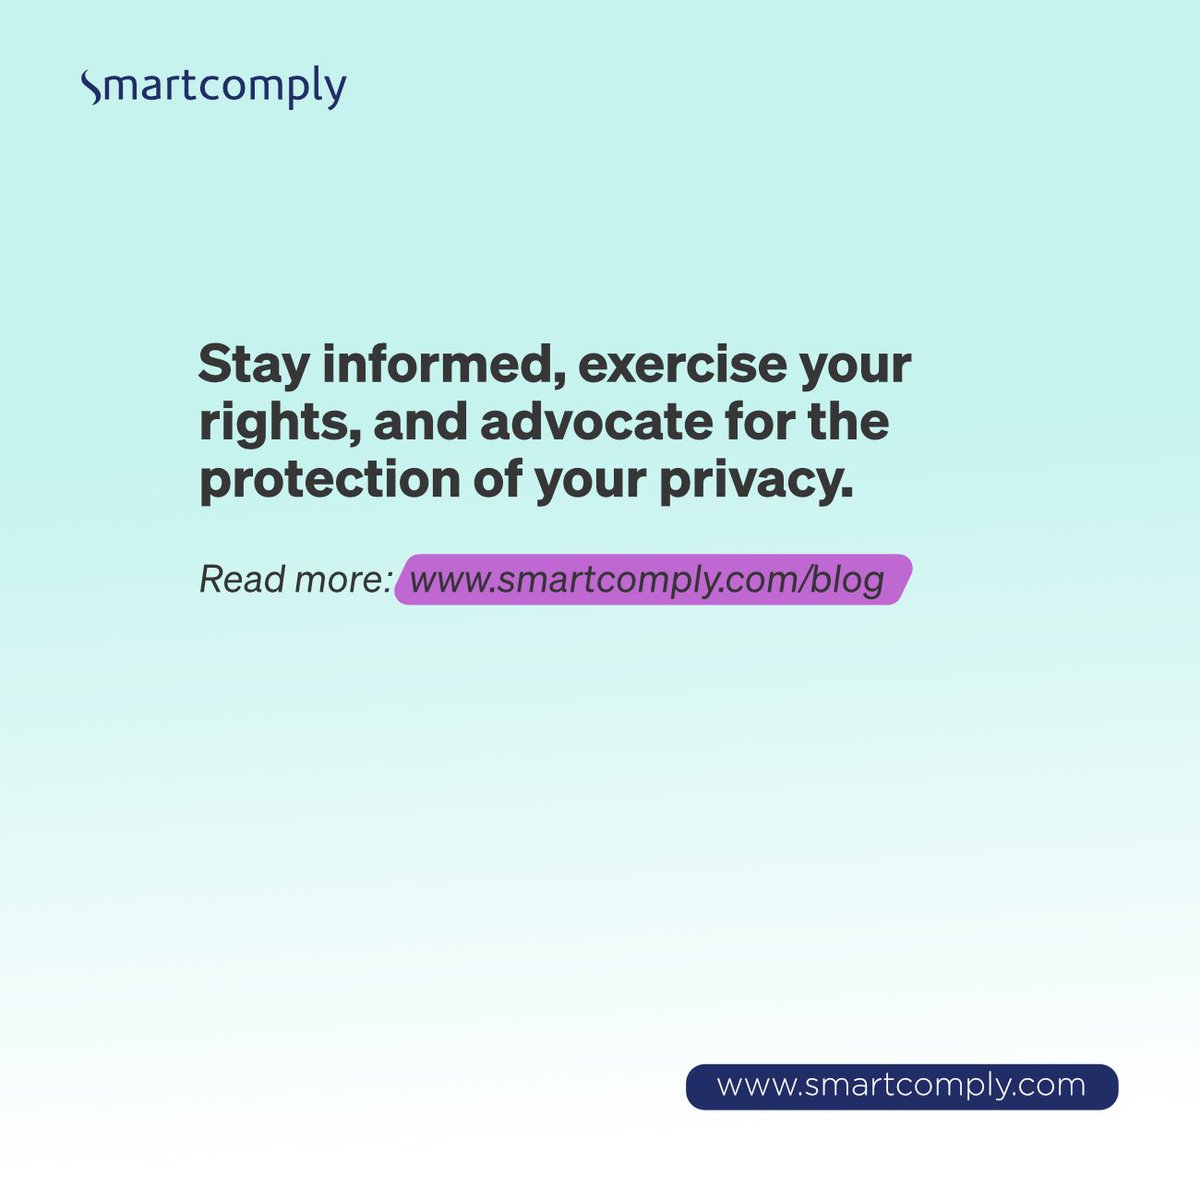 From access and rectification to erasure... each right serves as a shield against unauthorized use or misuse of your data. 

Stay informed, and feel free to exercise your rights as a data subject in Nigeria.

#DataProtection #PrivacyRights #NDPA #NDPC #Smartcomply